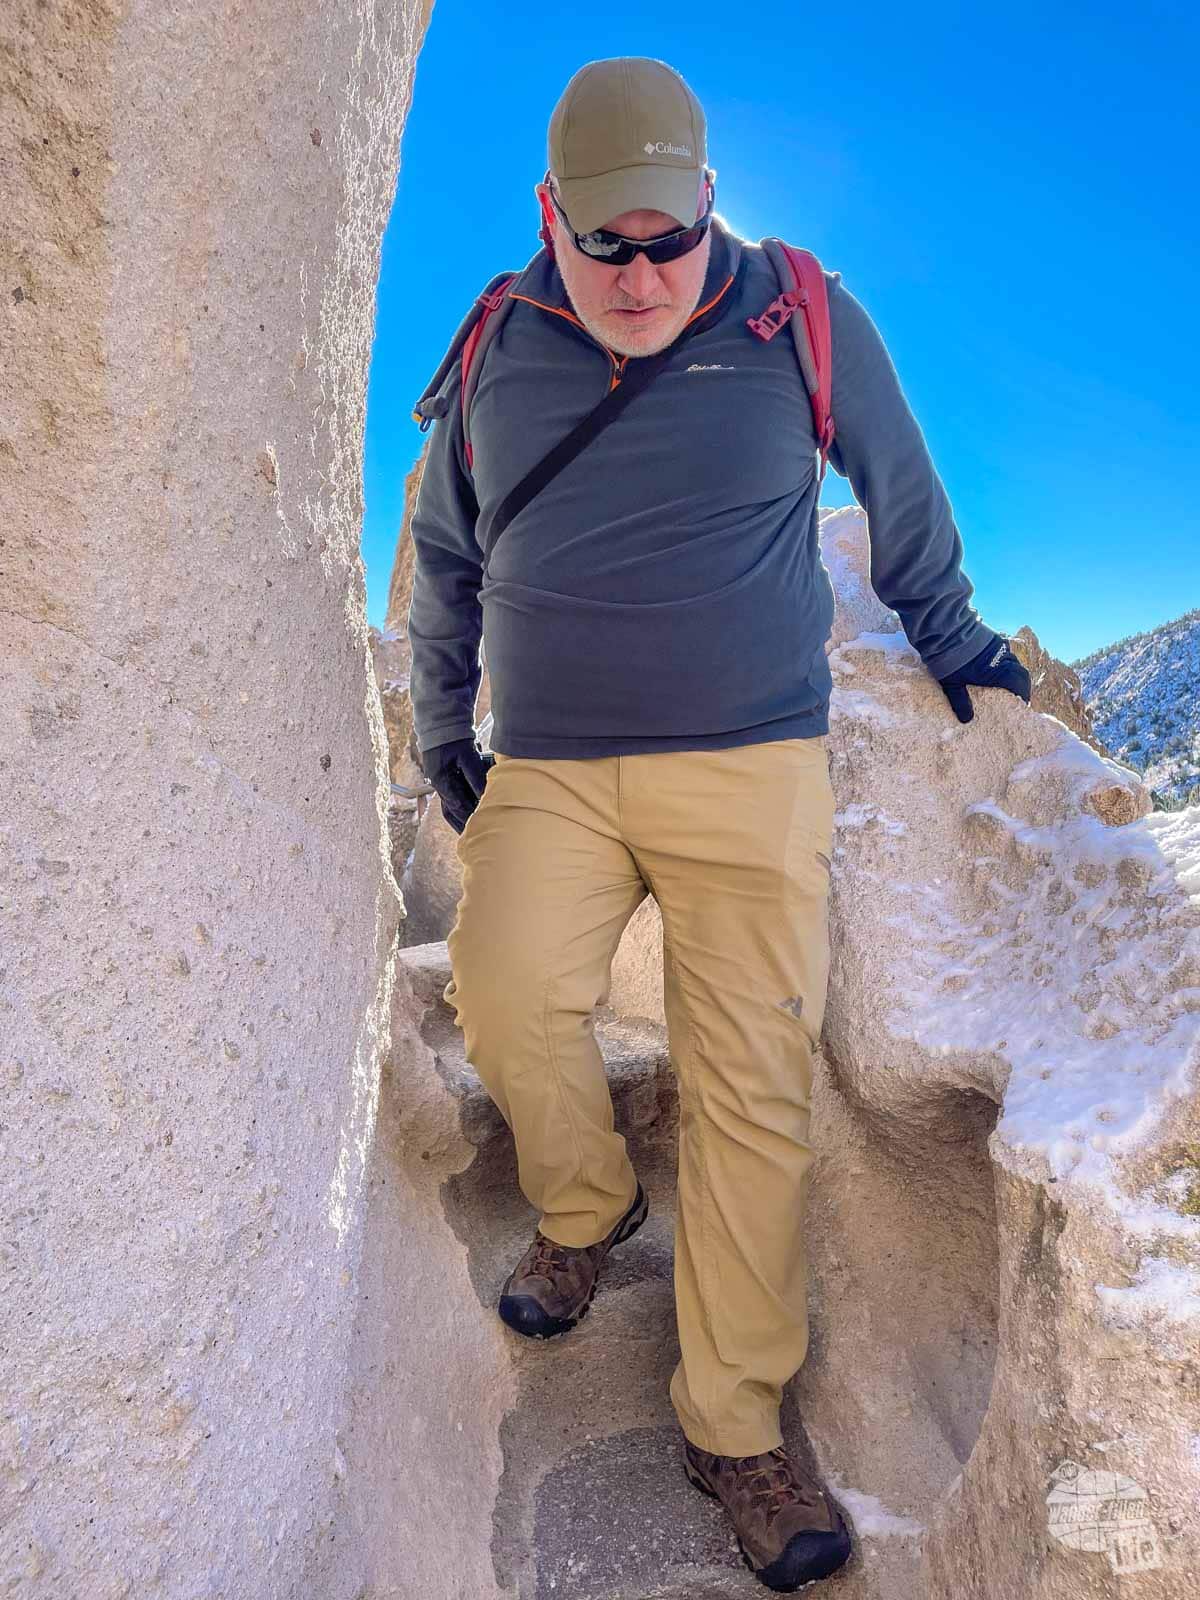 Grant carefully walks down a narrow staircase in the rock.